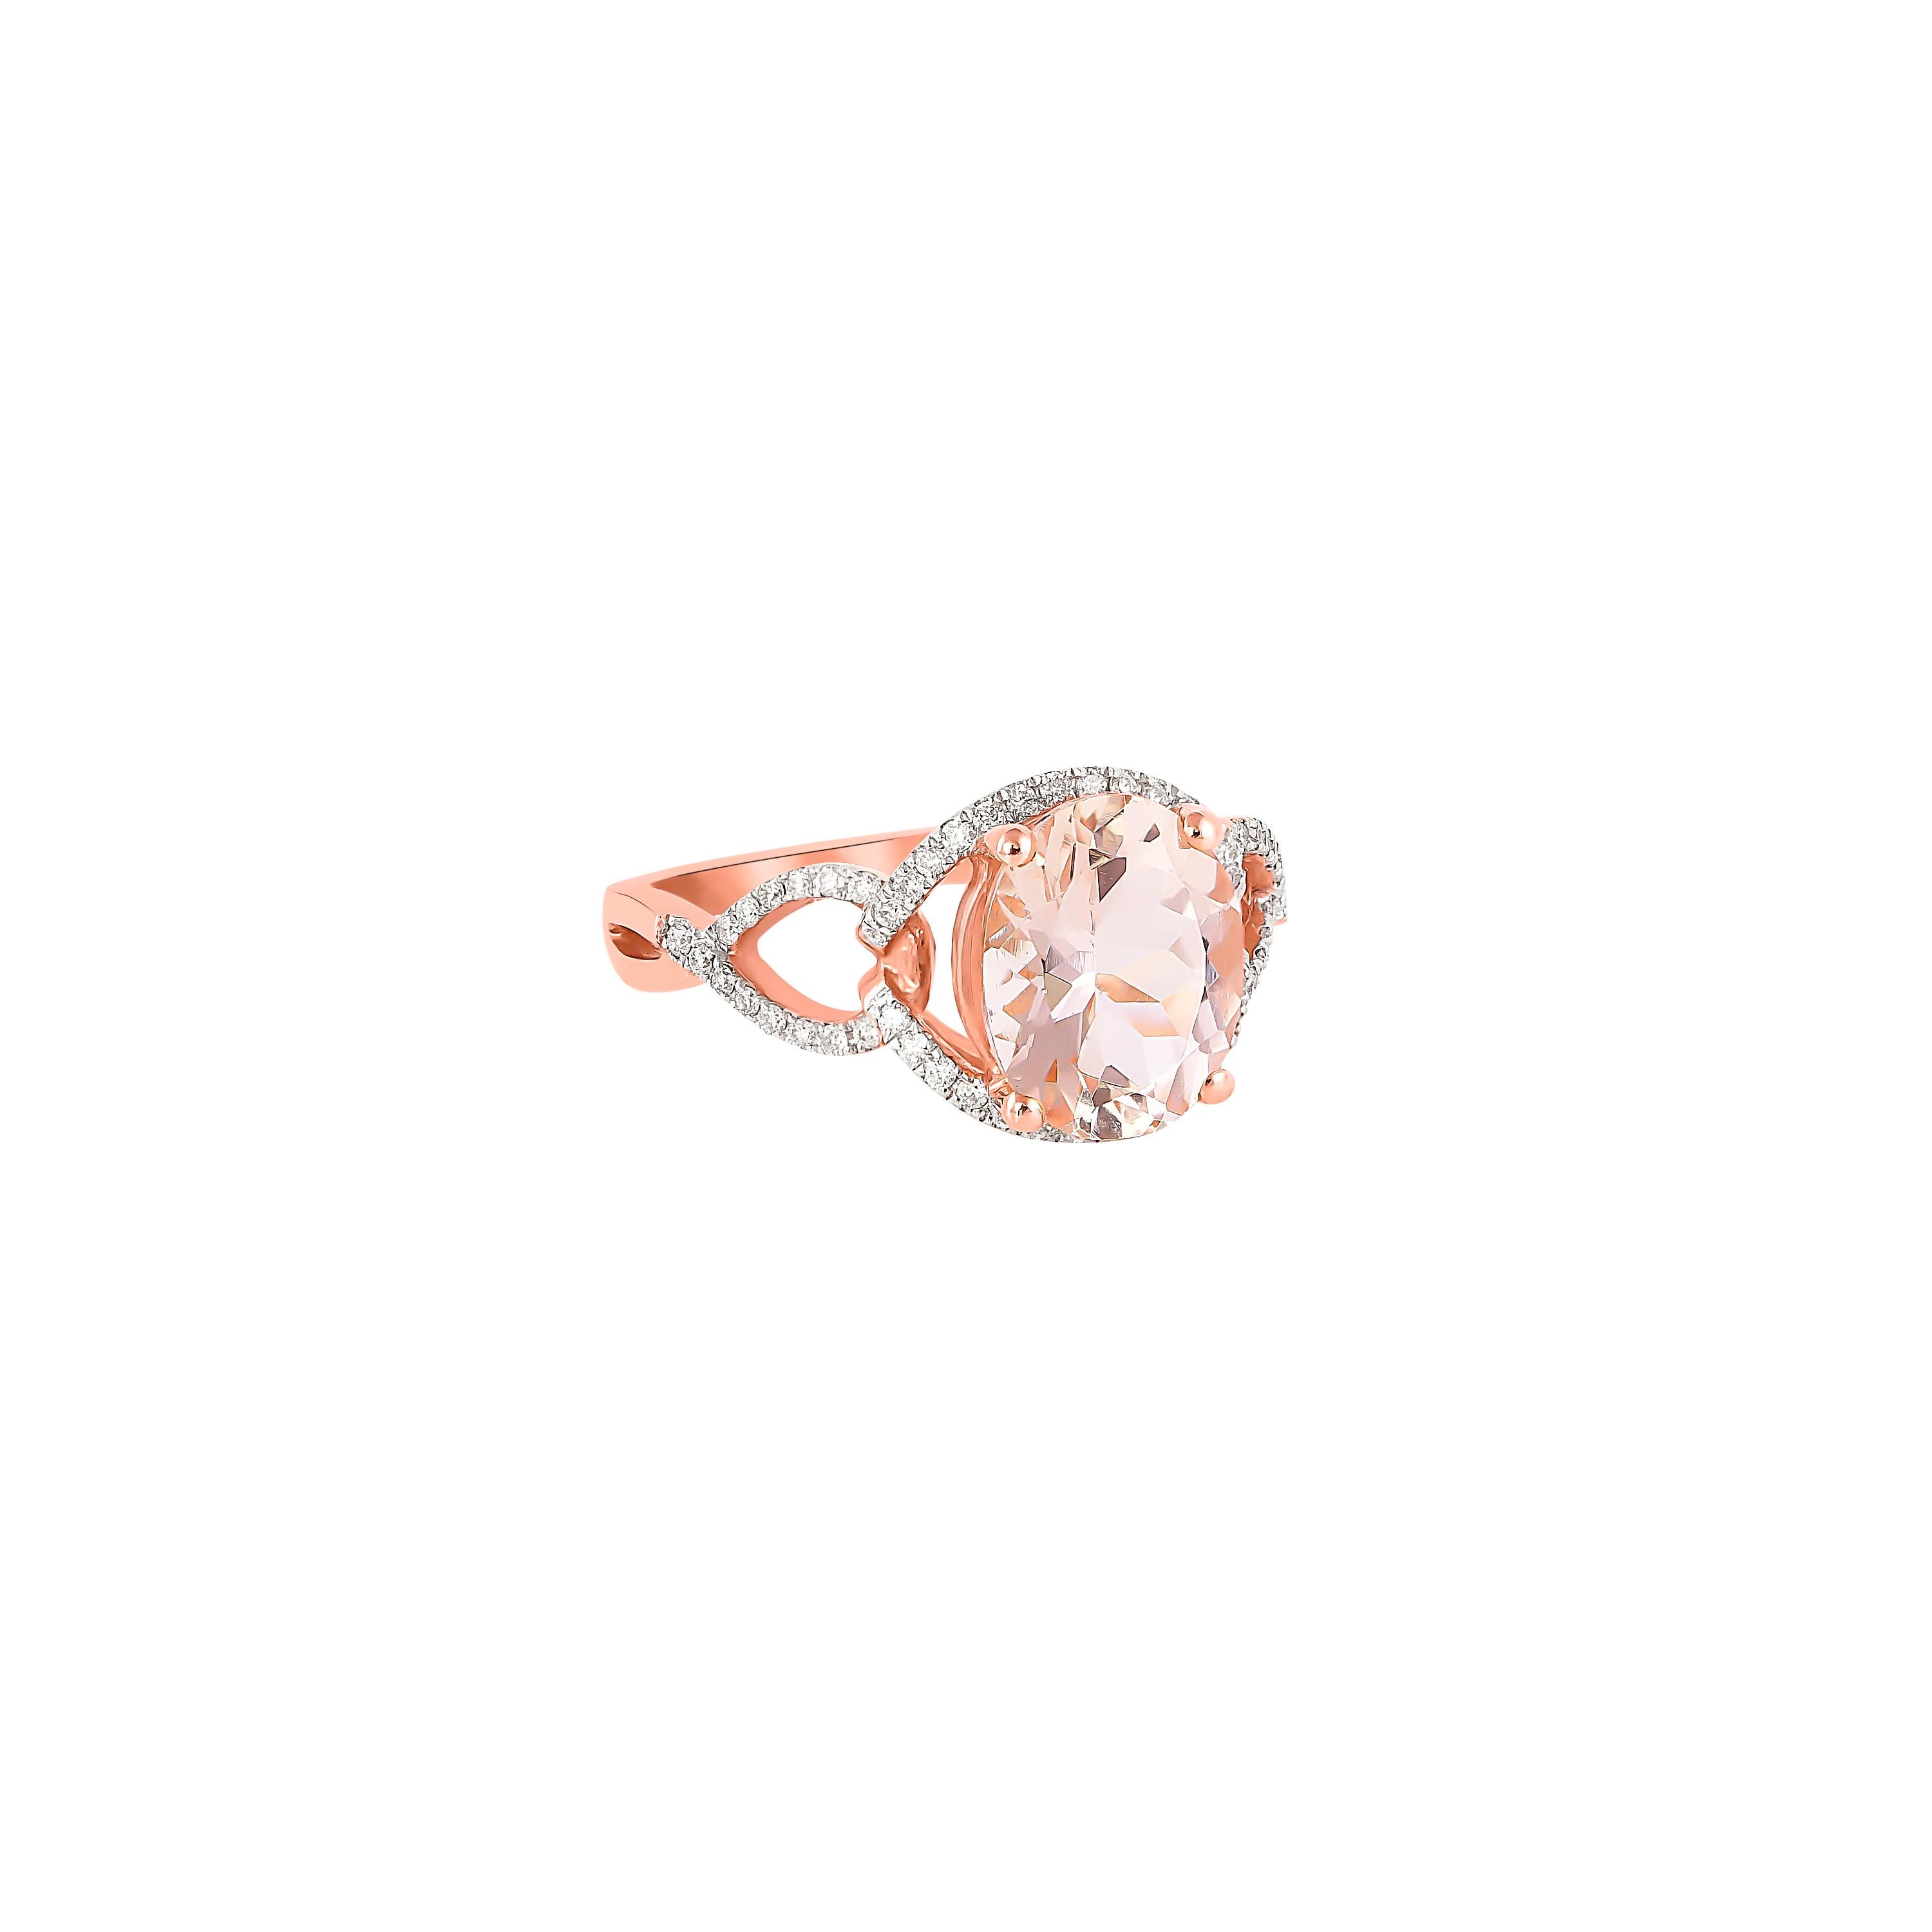 This collection features an array of magnificent morganites! Accented with Diamond these rings are made in rose gold and present a classic yet elegant look. 

Classic morganite ring in 18K Rose gold with Diamond. 

Morganite: 2.37 carat, 10X8mm